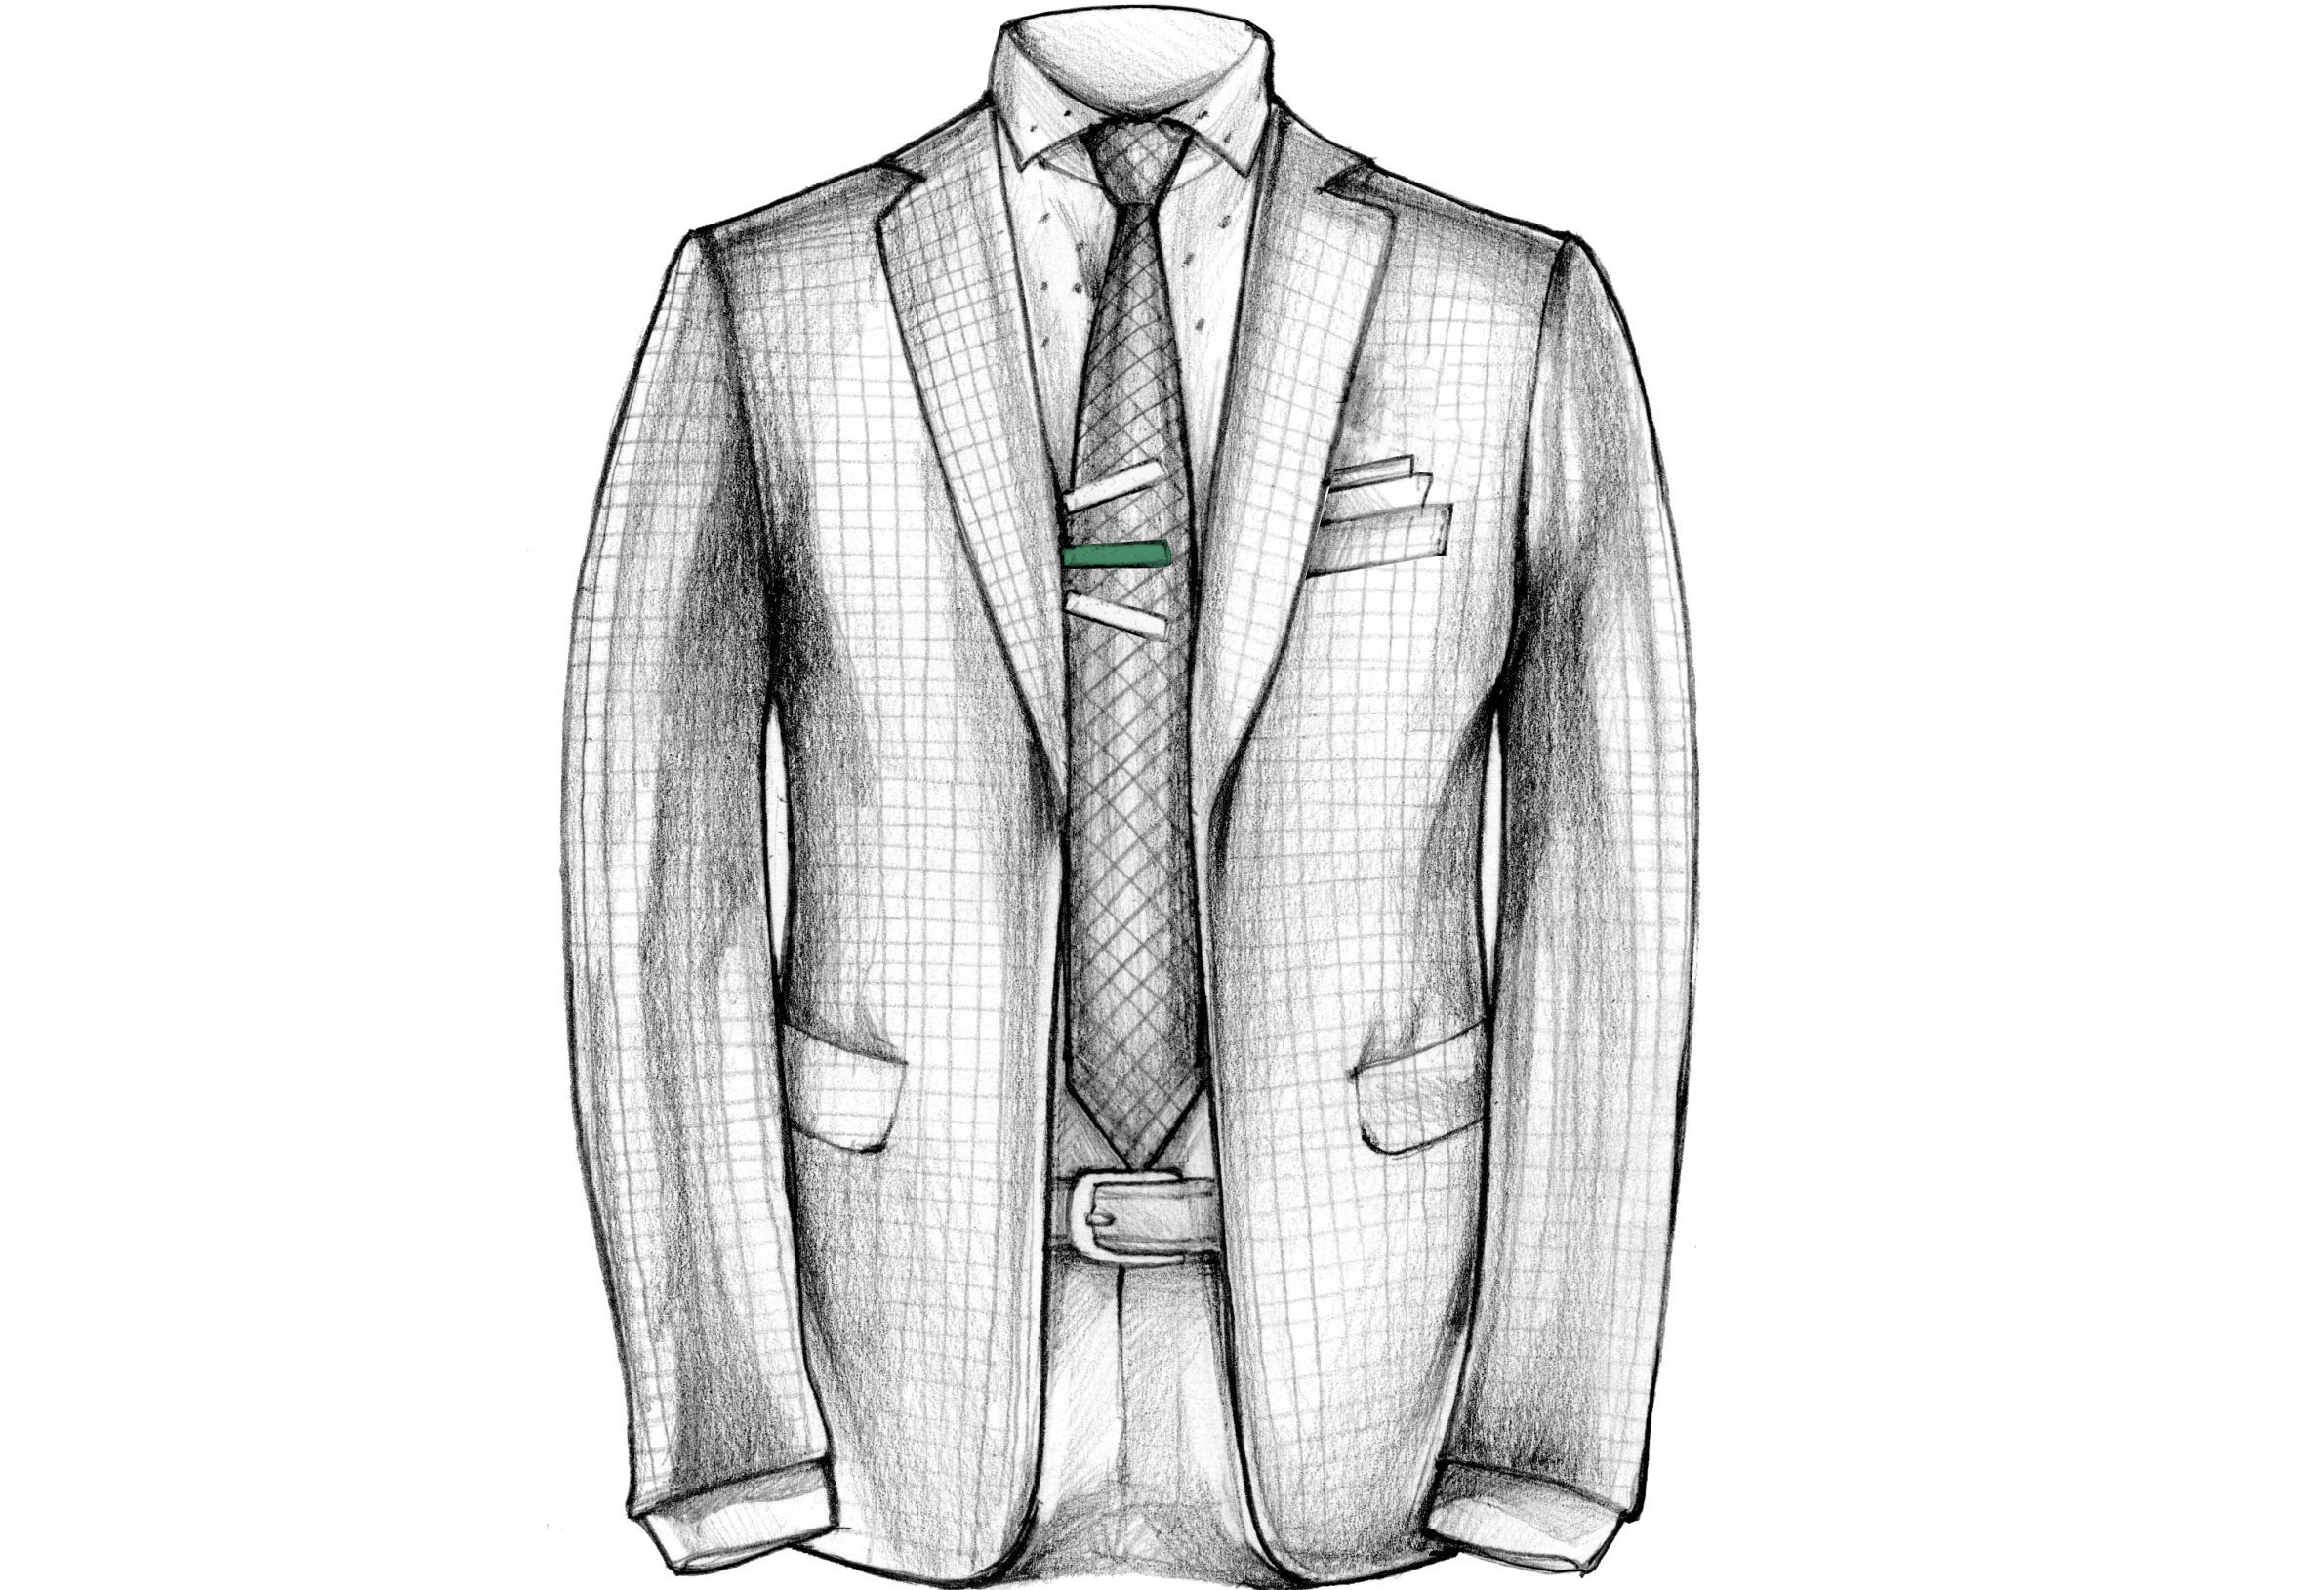 A Beginner's Guide to Tie Pins, Tie Clips, and Tie Bars